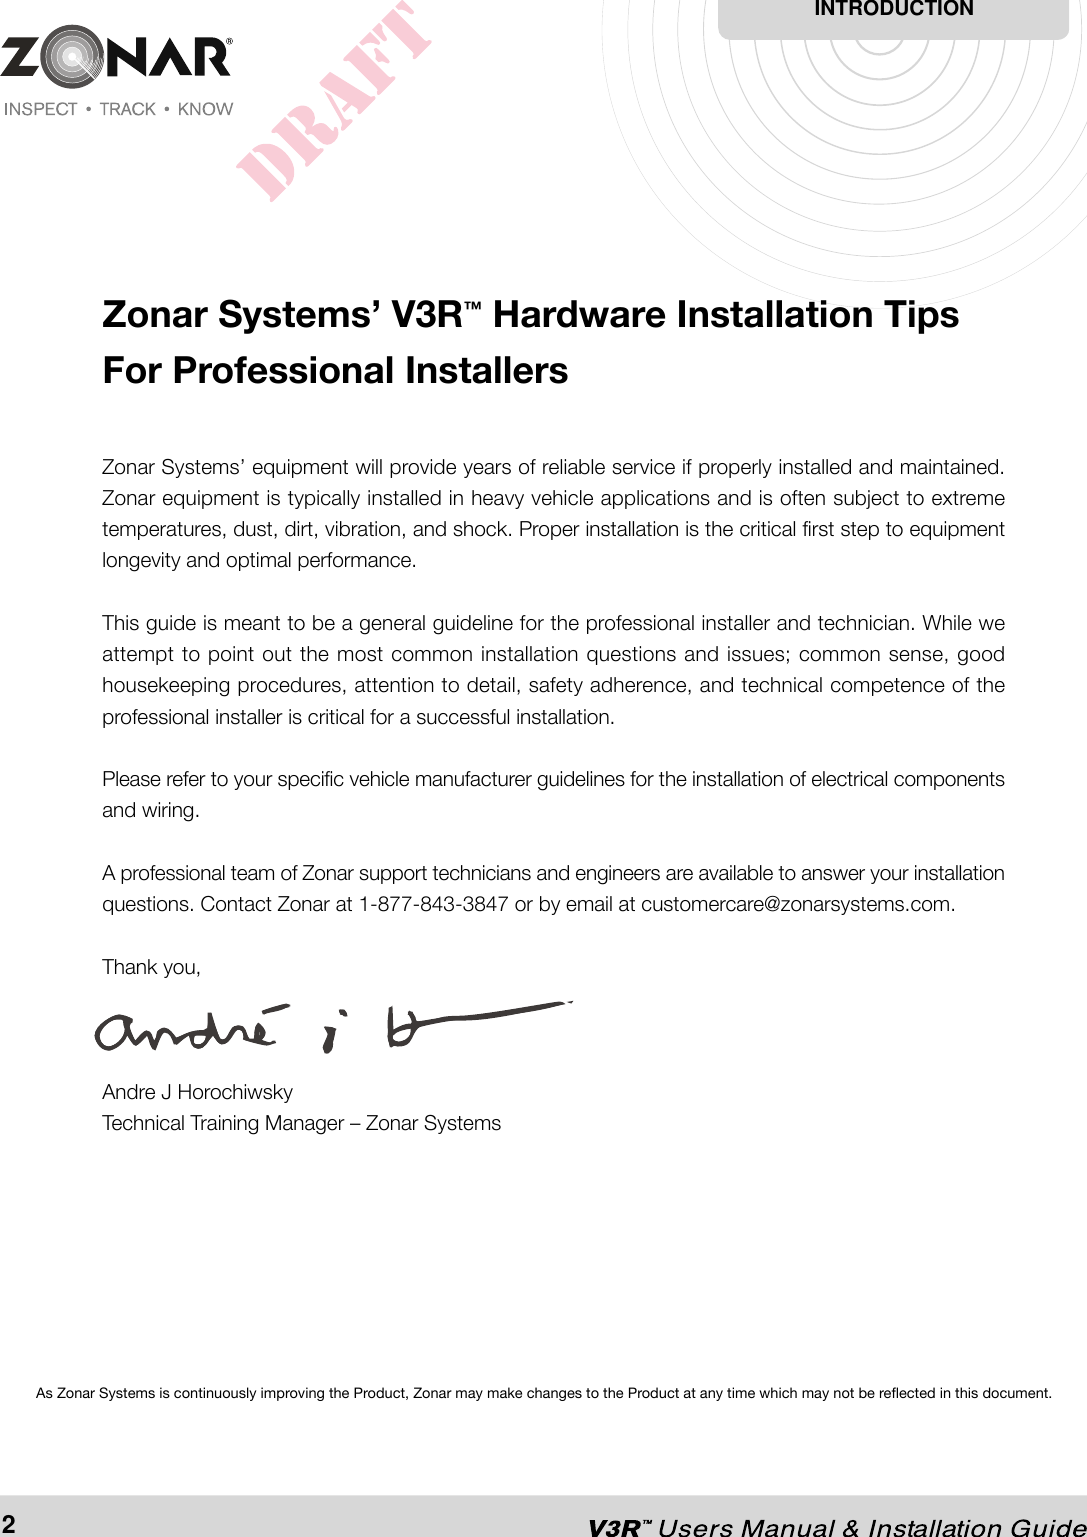 Zonar Systems’ V3R™ Hardware Installation TipsFor Professional InstallersZonar Systems’ equipment will provide years of reliable service if properly installed and maintained.Zonar equipment is typically installed in heavy vehicle applications and is often subject to extremetemperatures, dust, dirt, vibration, and shock. Proper installation is the critical first step to equipmentlongevity and optimal performance.This guide is meant to be a general guideline for the professional installer and technician. While weattempt to point out the most common installation questions and issues; common sense, goodhousekeeping procedures, attention to detail, safety adherence, and technical competence of theprofessional installer is critical for a successful installation.Please refer to your specific vehicle manufacturer guidelines for the installation of electrical componentsand wiring.A professional team of Zonar support technicians and engineers are available to answer your installationquestions. Contact Zonar at 1-877-843-3847 or by email at customercare@zonarsystems.com.Thank you,Andre J HorochiwskyTechnical Training Manager – Zonar SystemsAs Zonar Systems is continuously improving the Product, Zonar may make changes to the Product at any time which may not be reflected in this document.INTRODUCTION2